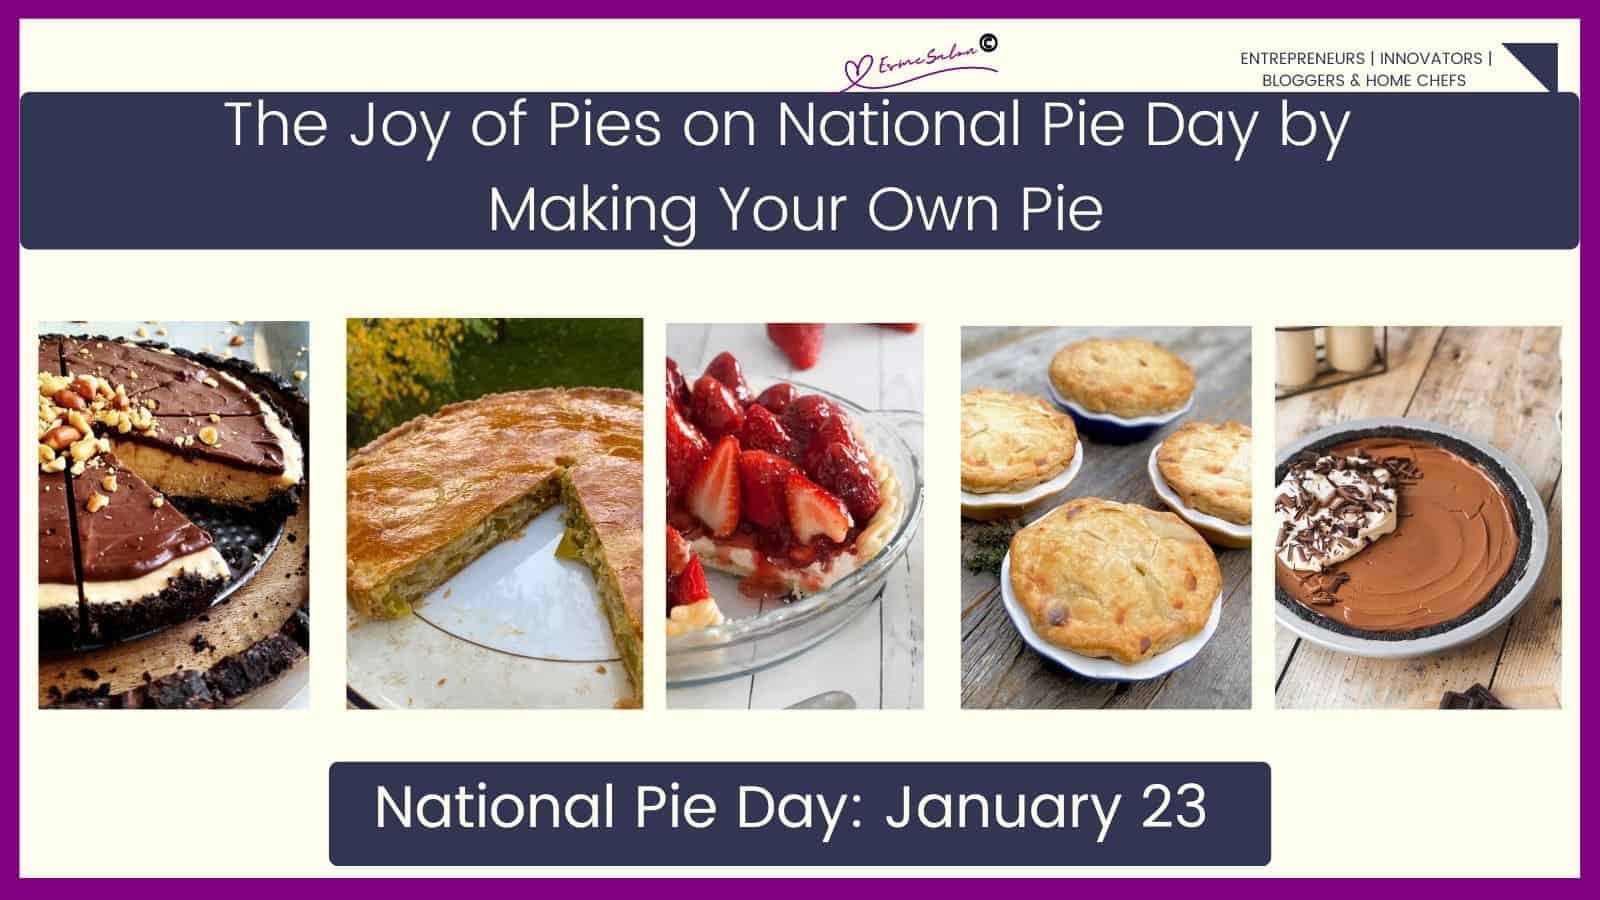 Celebrating the Joy of Pies on National Pie Day